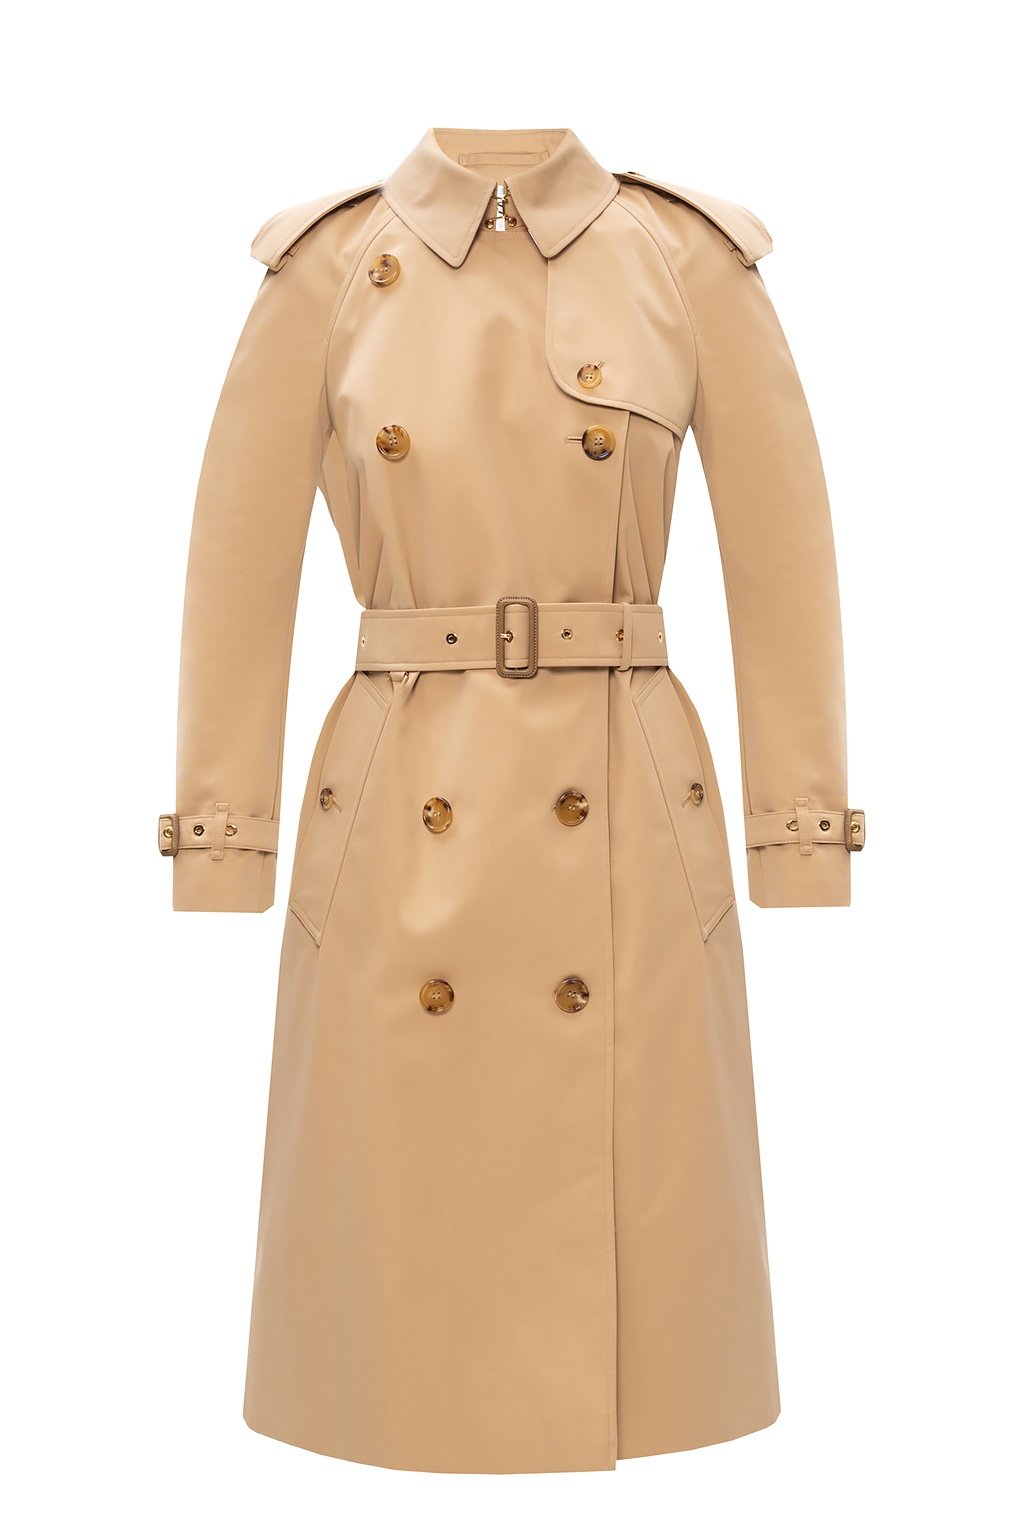 burberry double breasted trench coat